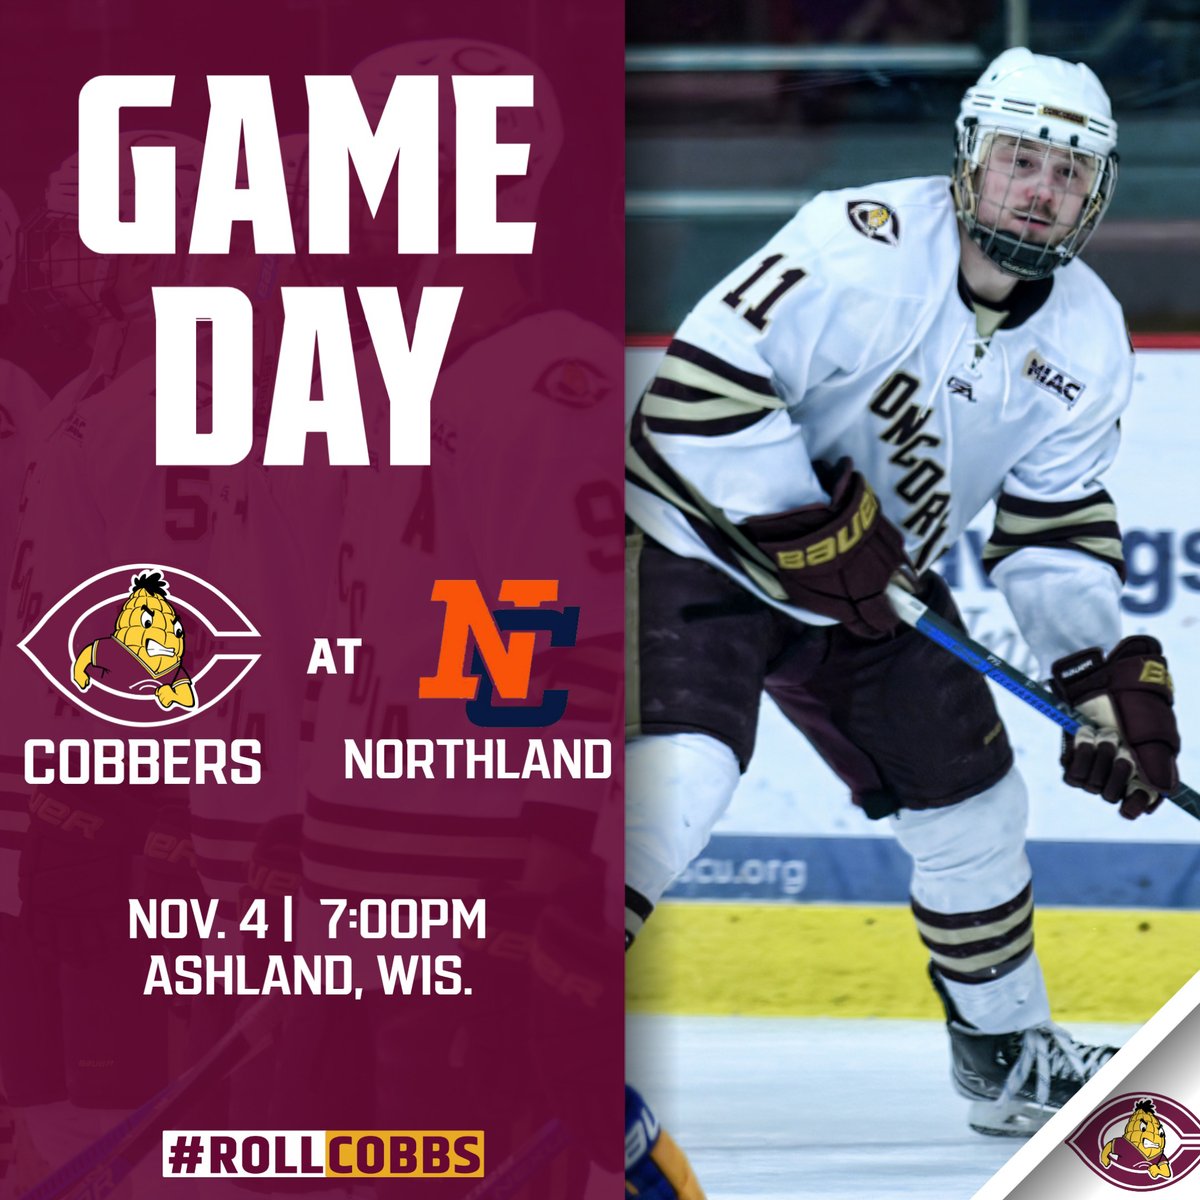 GAMEDAY! Men's headed back to the land of 🧀 for 2 more games. They kick off their weekend in Ashland, Wis. Can CC make it 2 🇼's in a row? Fans can follow along with live video & stats to find out! #RollCobbs🌽